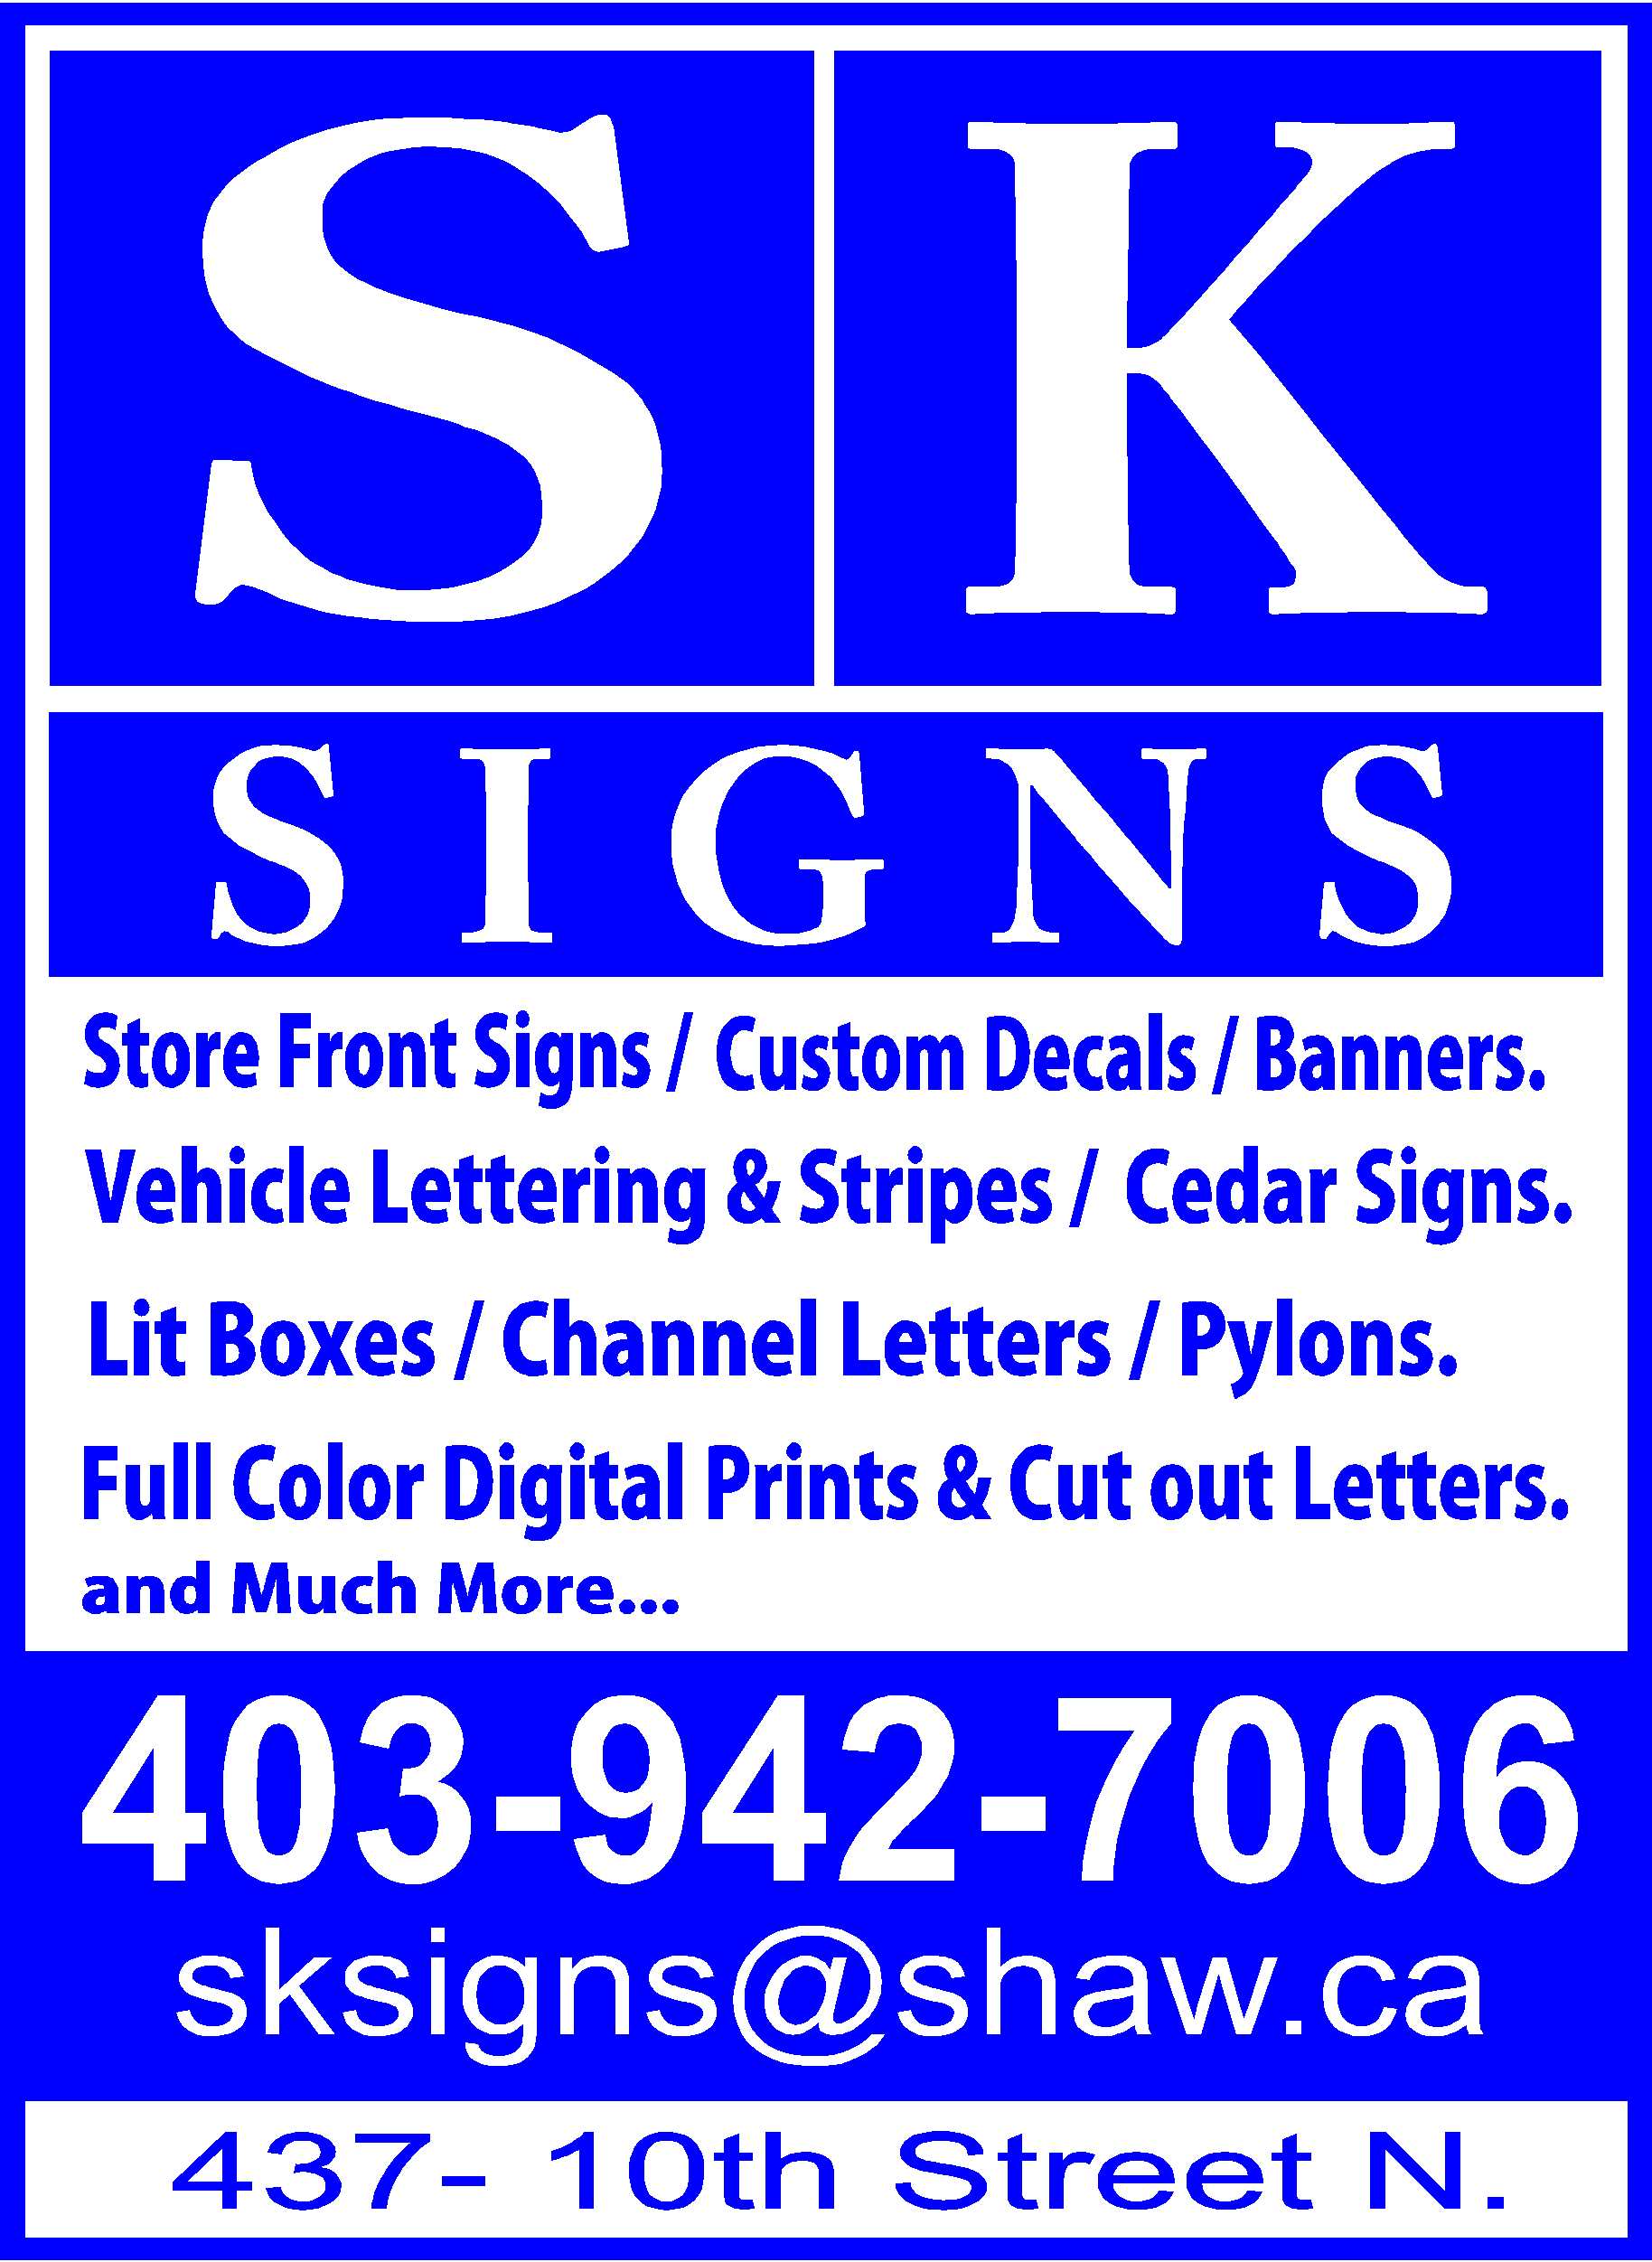 SK SIGNS & Graphic Design